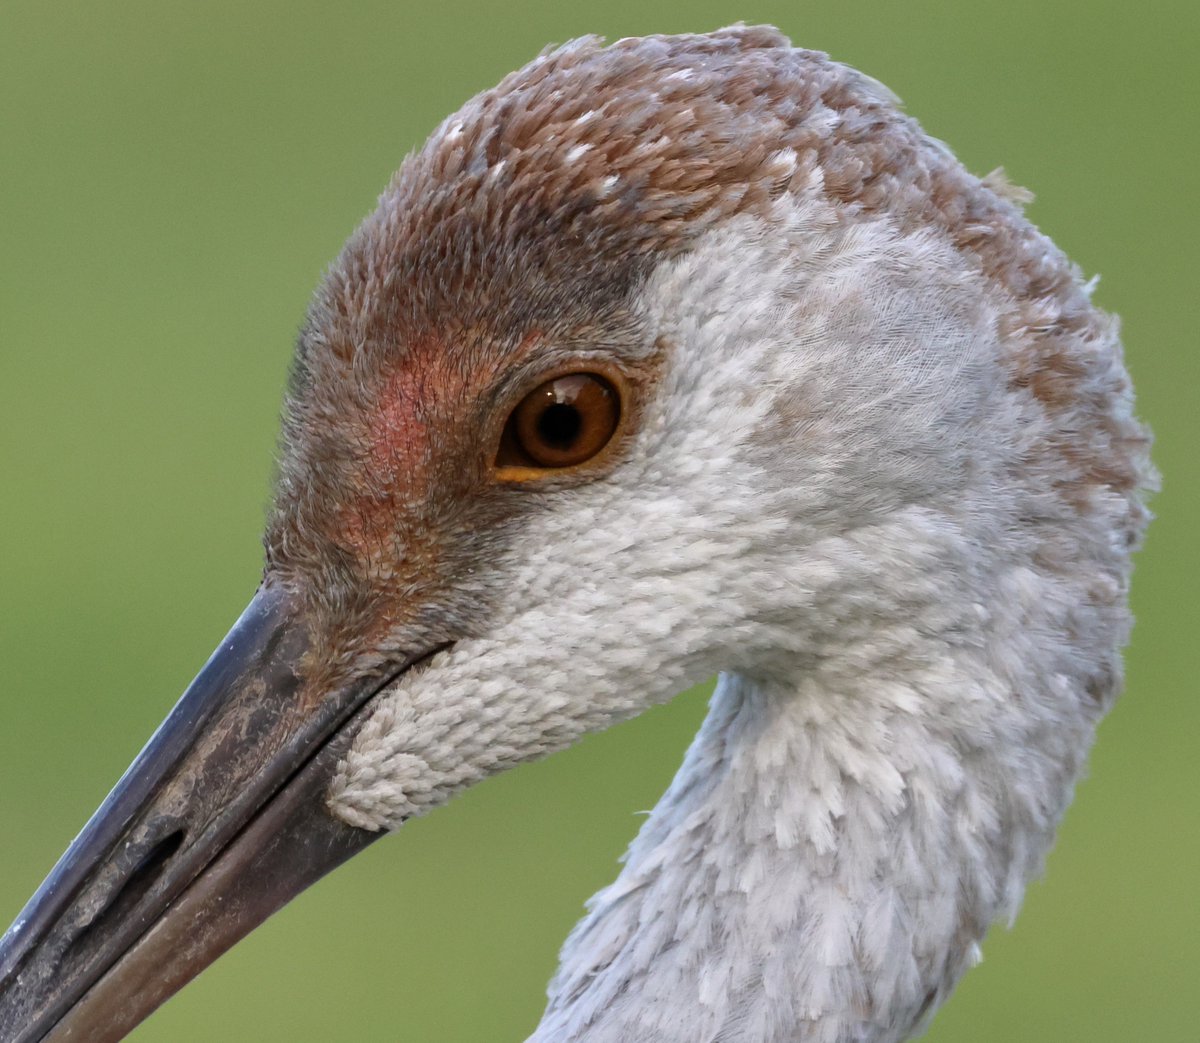 For #GlobalBigDay2023 I am inside my apt. It’s raining again today! Here’s a Sandhill Crane colt close up. I have followed and documented this family all summer. What an experience it was! Countless hours of observing and enjoyment were had just sitting and photographing them.